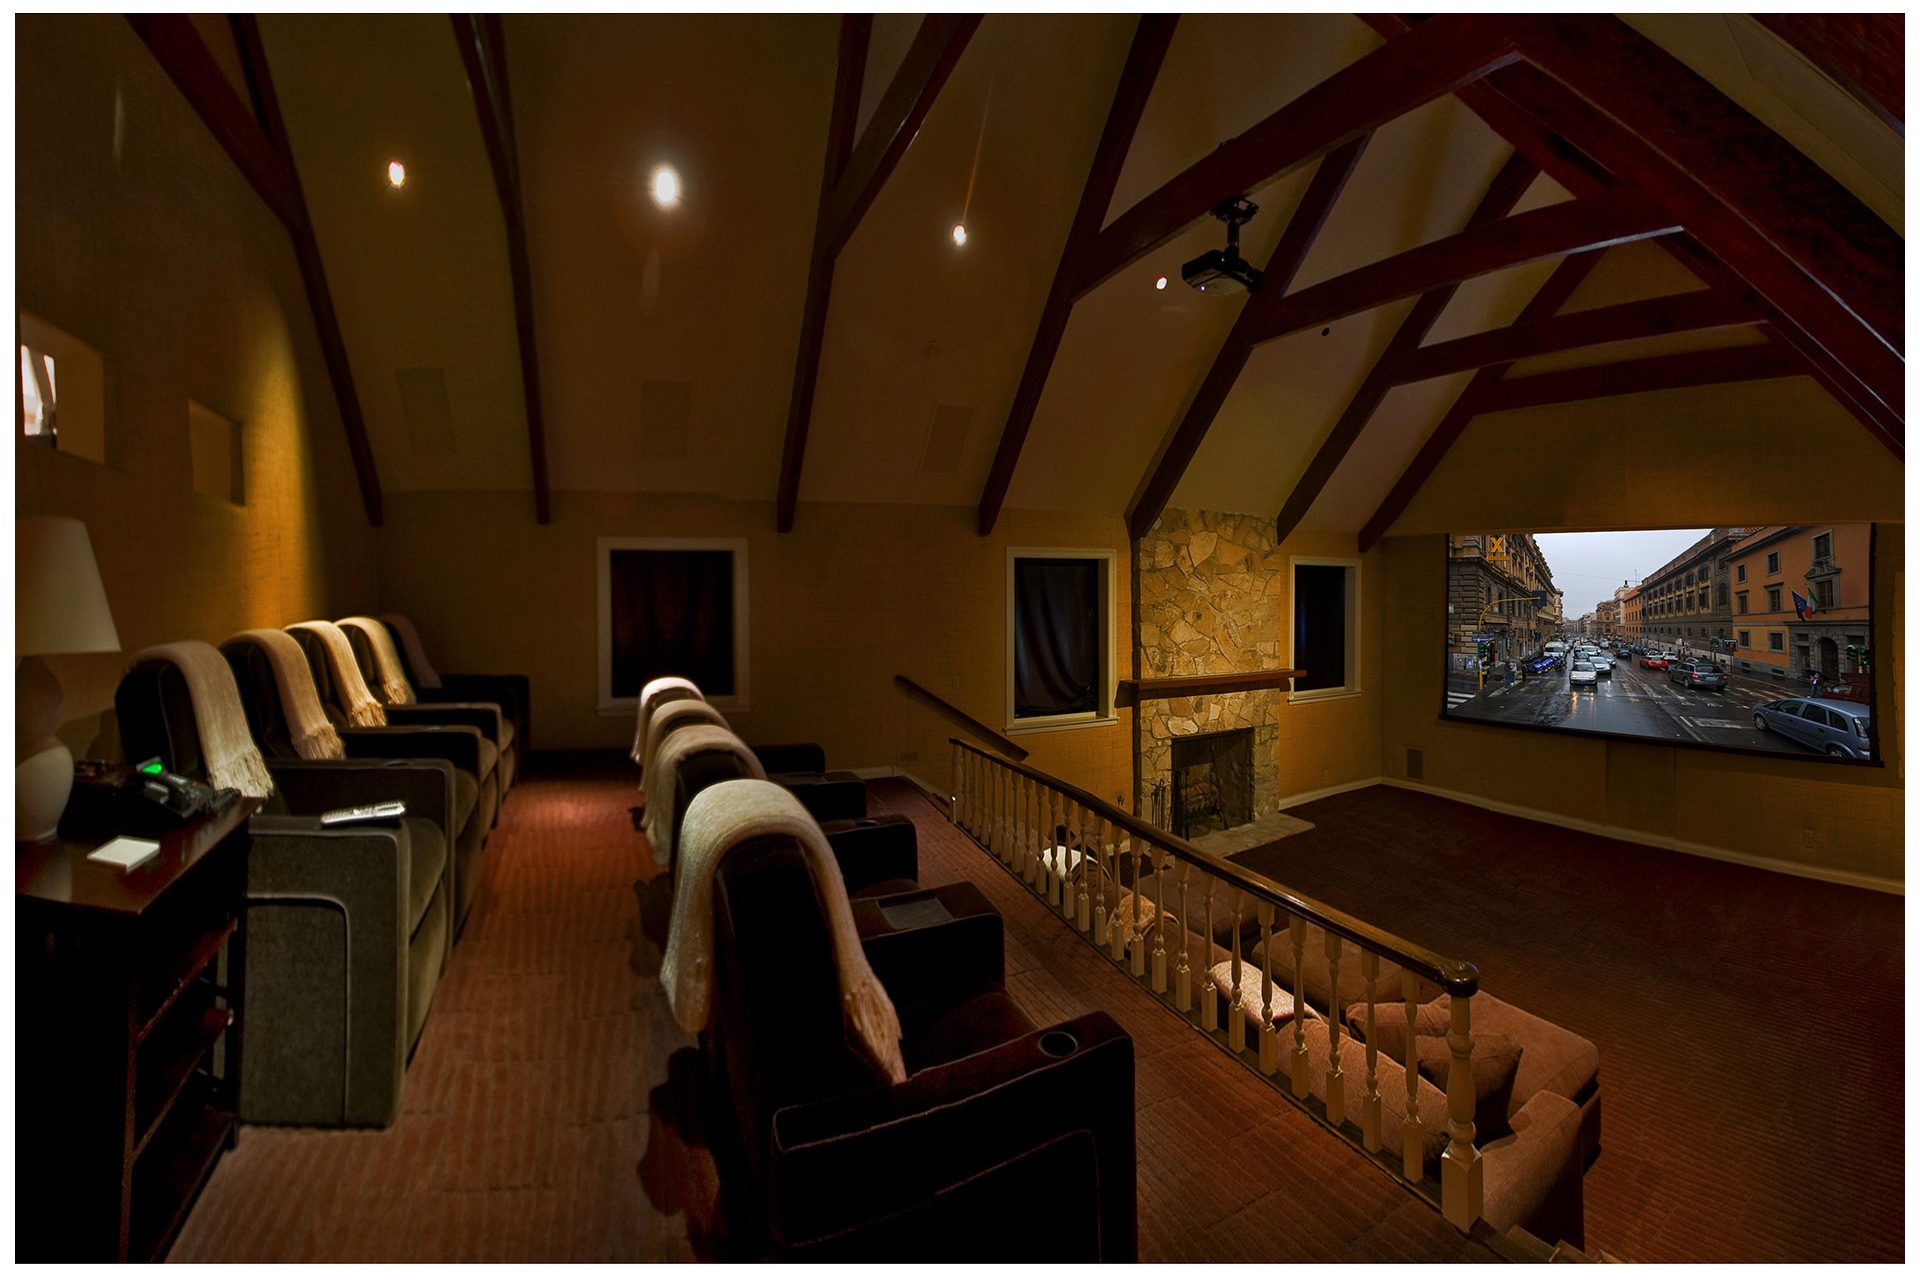 DEDICATED LARGE THEATER The screening room in this large theater was fitted with both a 35mm projection system and later on with a video projector system. Shades were installed to darken the room for daytime viewing. This theater designed for a large family featured 14 seats. A Crestron touch panel offered complete control of all AV and lighting. Theater features JBL Synthesis audio elements and a Digital Projections projector.